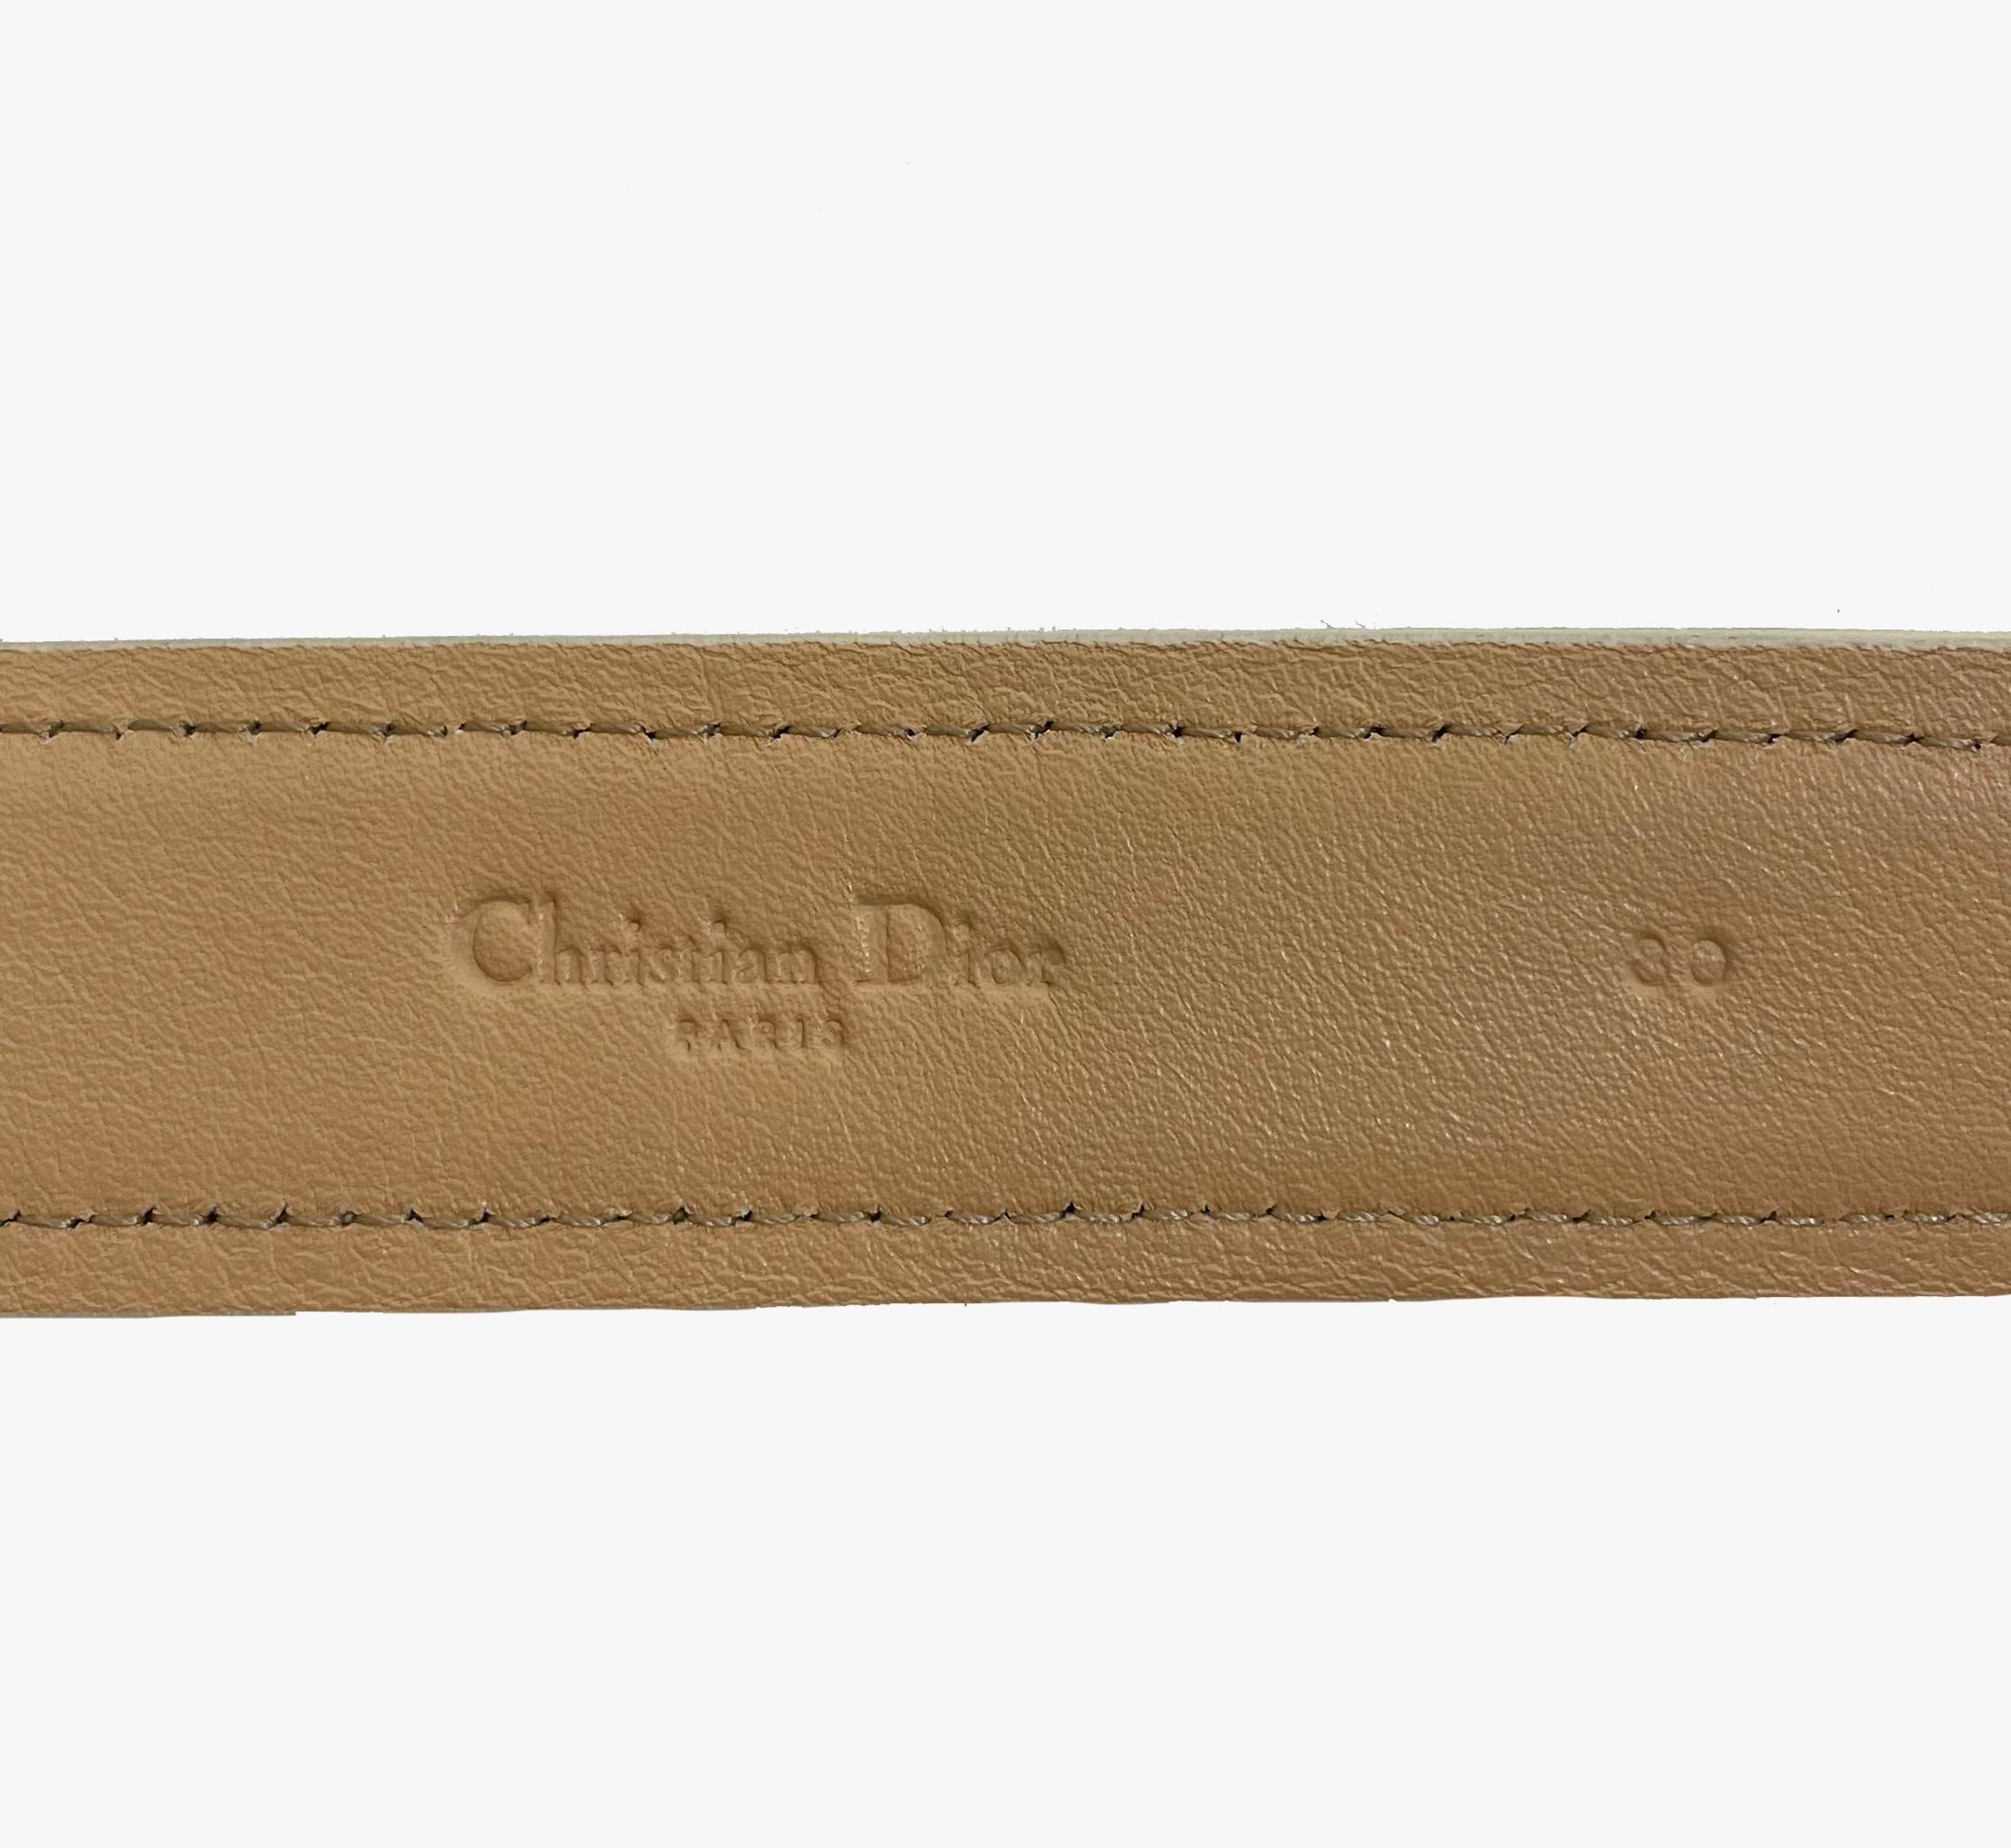 Vintage Christian Dior leather belt In Good Condition For Sale In New York, NY